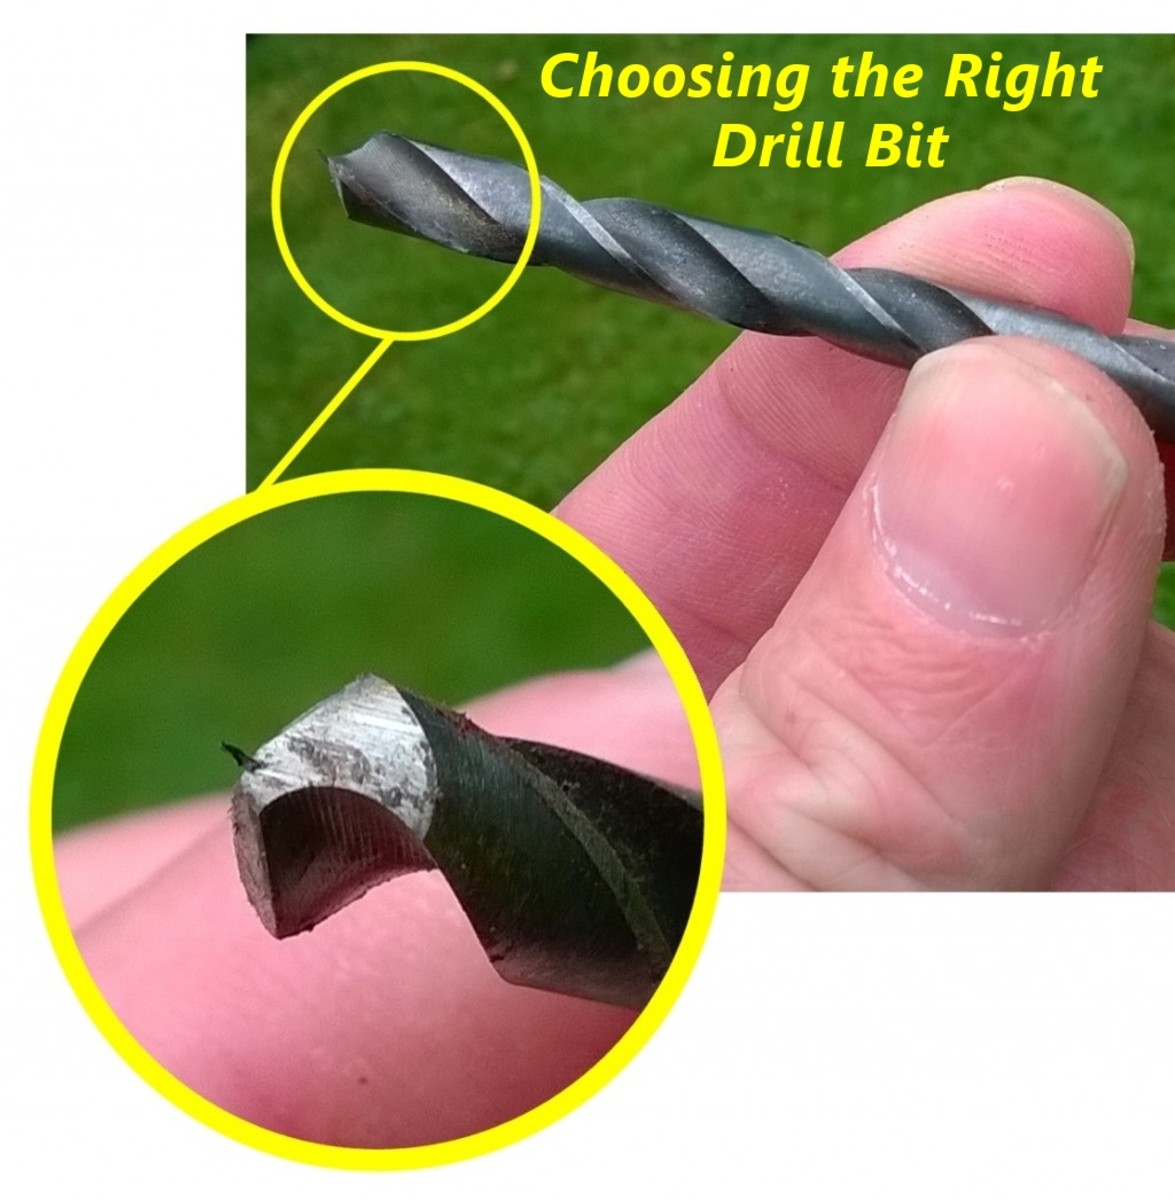 How to Choose the Right Drill Bit for Metal, Wood, Tiles, Glass or Masonry